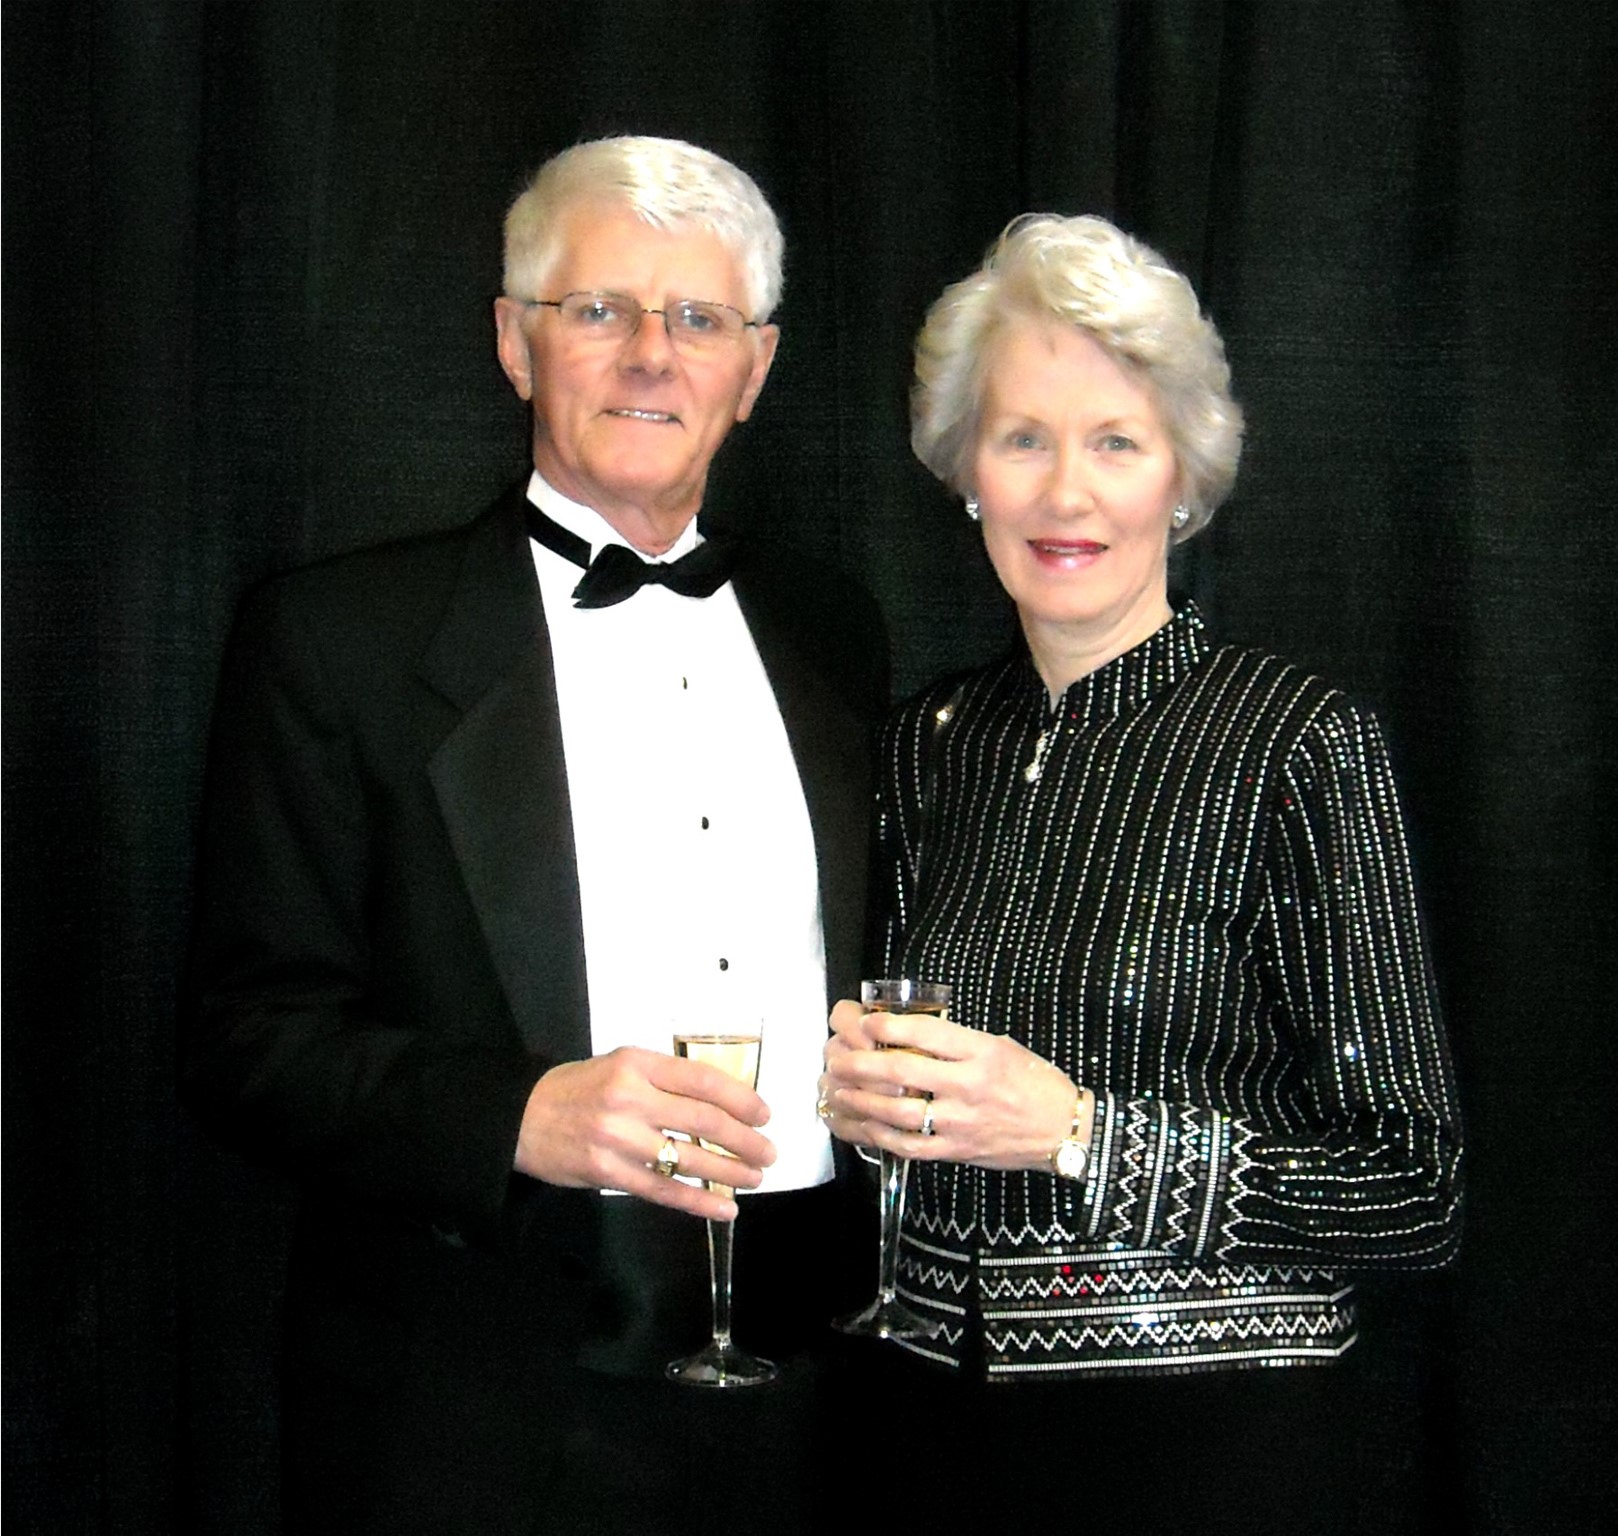 Larry Howell and wife Katherine Niven Howell